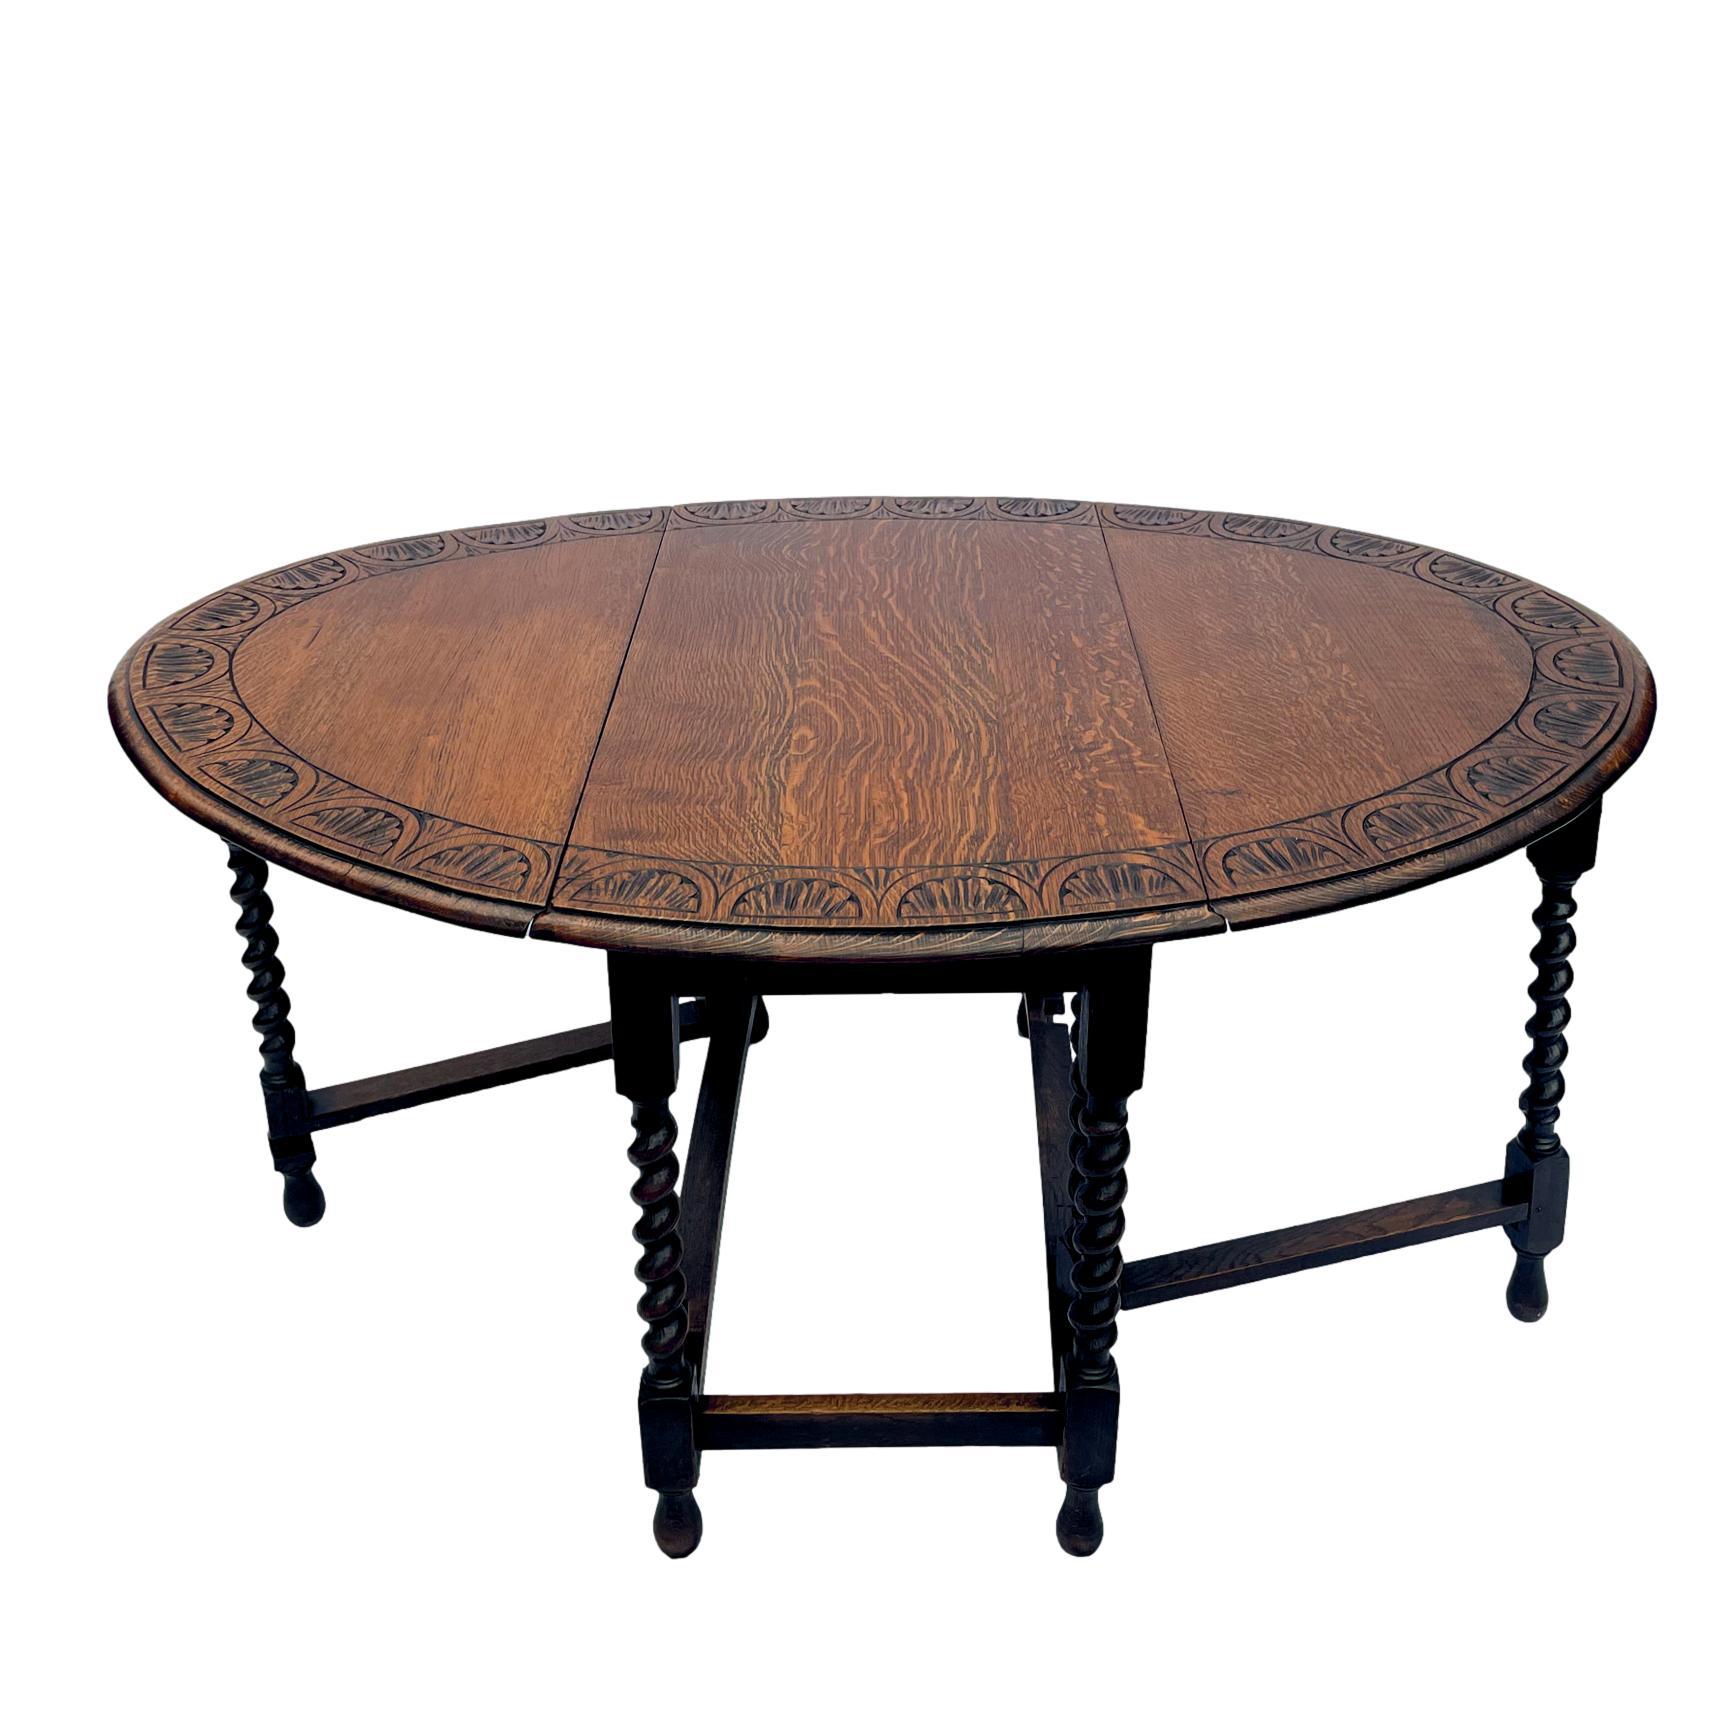 An Oak Barley Twist Dropleaf Gateleg Table with a carved and notched stylized band, English, circa 1920. A beautiful and highly functional table.